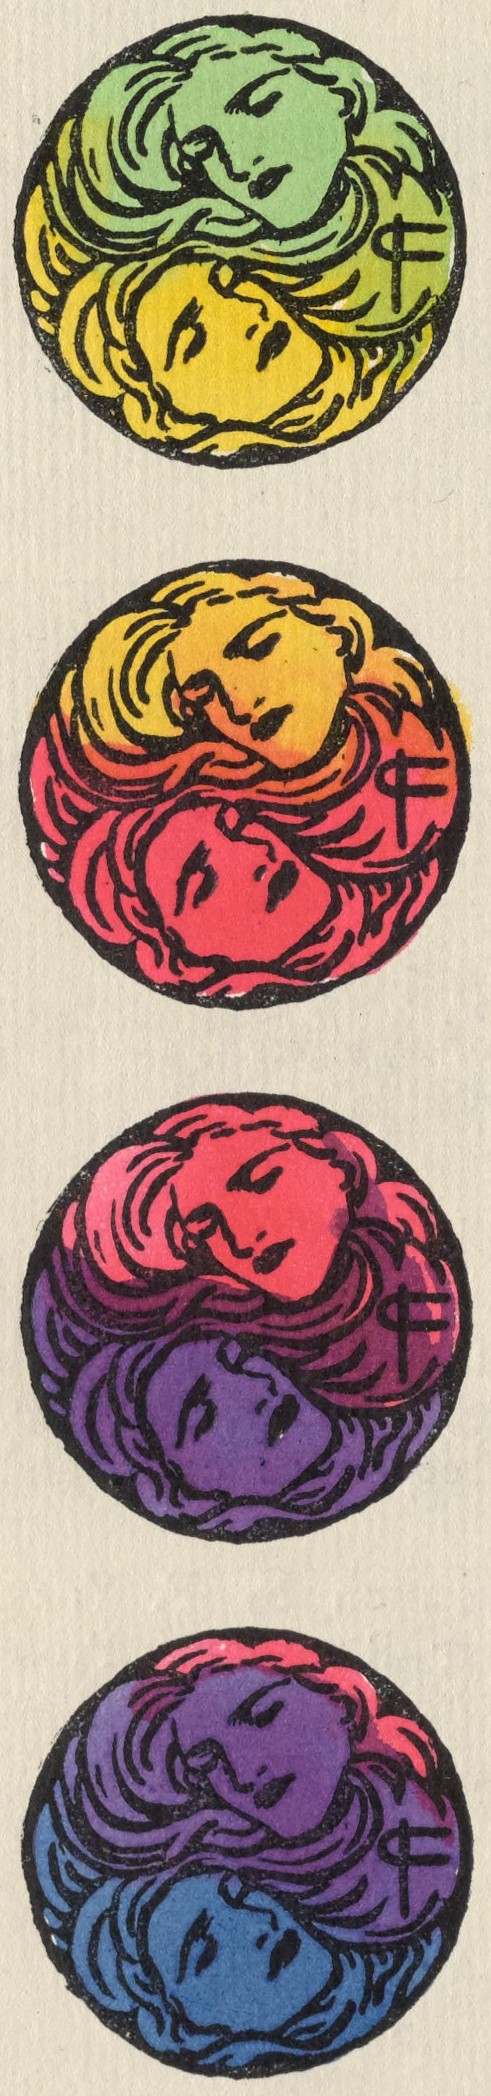 This hand-coloured border illustration borders the text of the poem “From East to West” along the left. It consists of four coloured circles, each containing two faces, and each corresponding to the stanza with which it aligns. The Both faces face the viewer, one atop the other, surrounded by their long hair. The images shift in colour, top to bottom, through green, yellow, orange, red, purple, and blue, corresponding to the time of day represented in the aligned stanza, moving from dawn to night. The artist’s monogram is in the right side of each image.